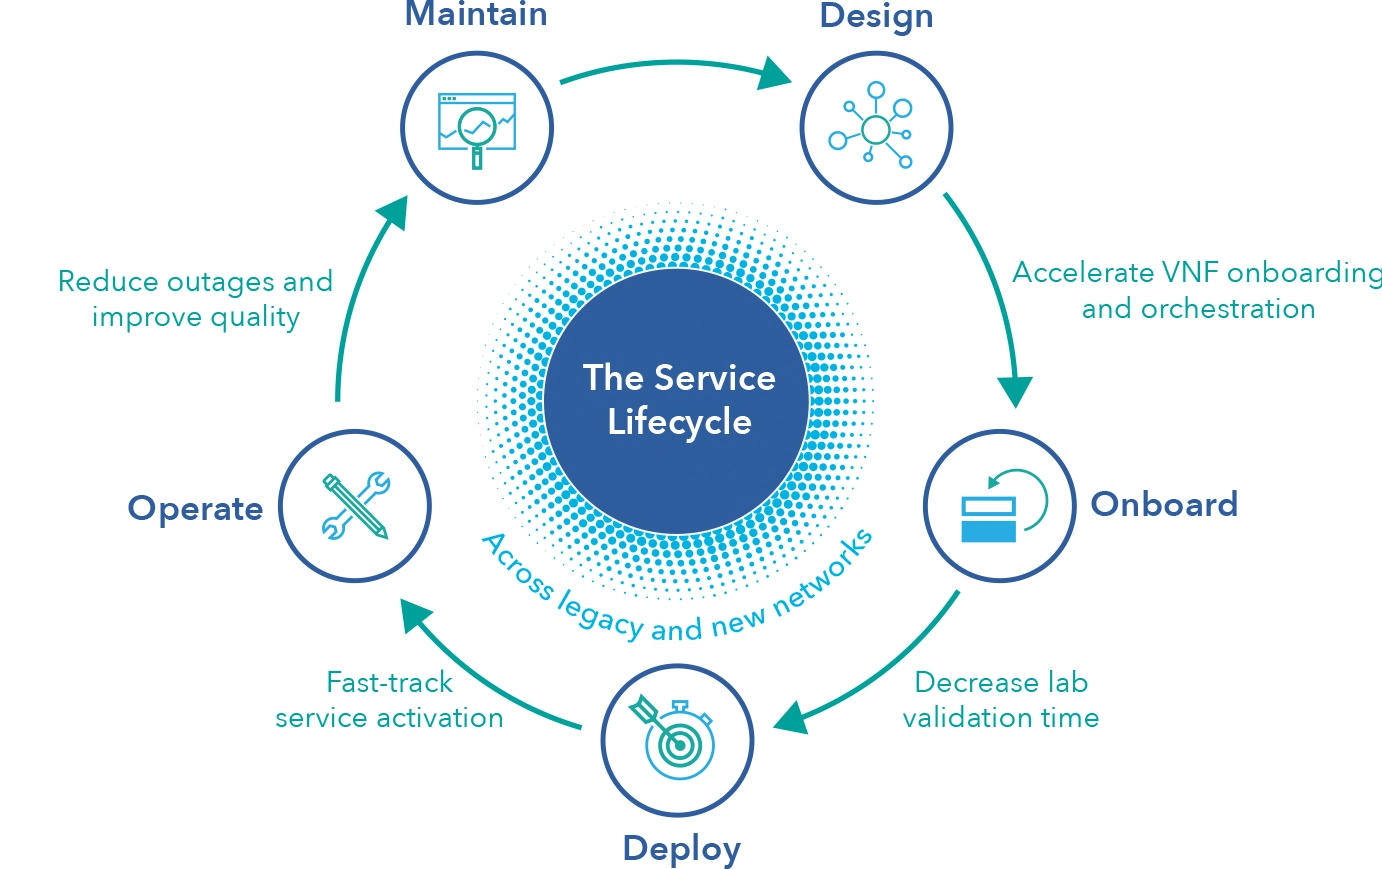 The Service Lifecycle